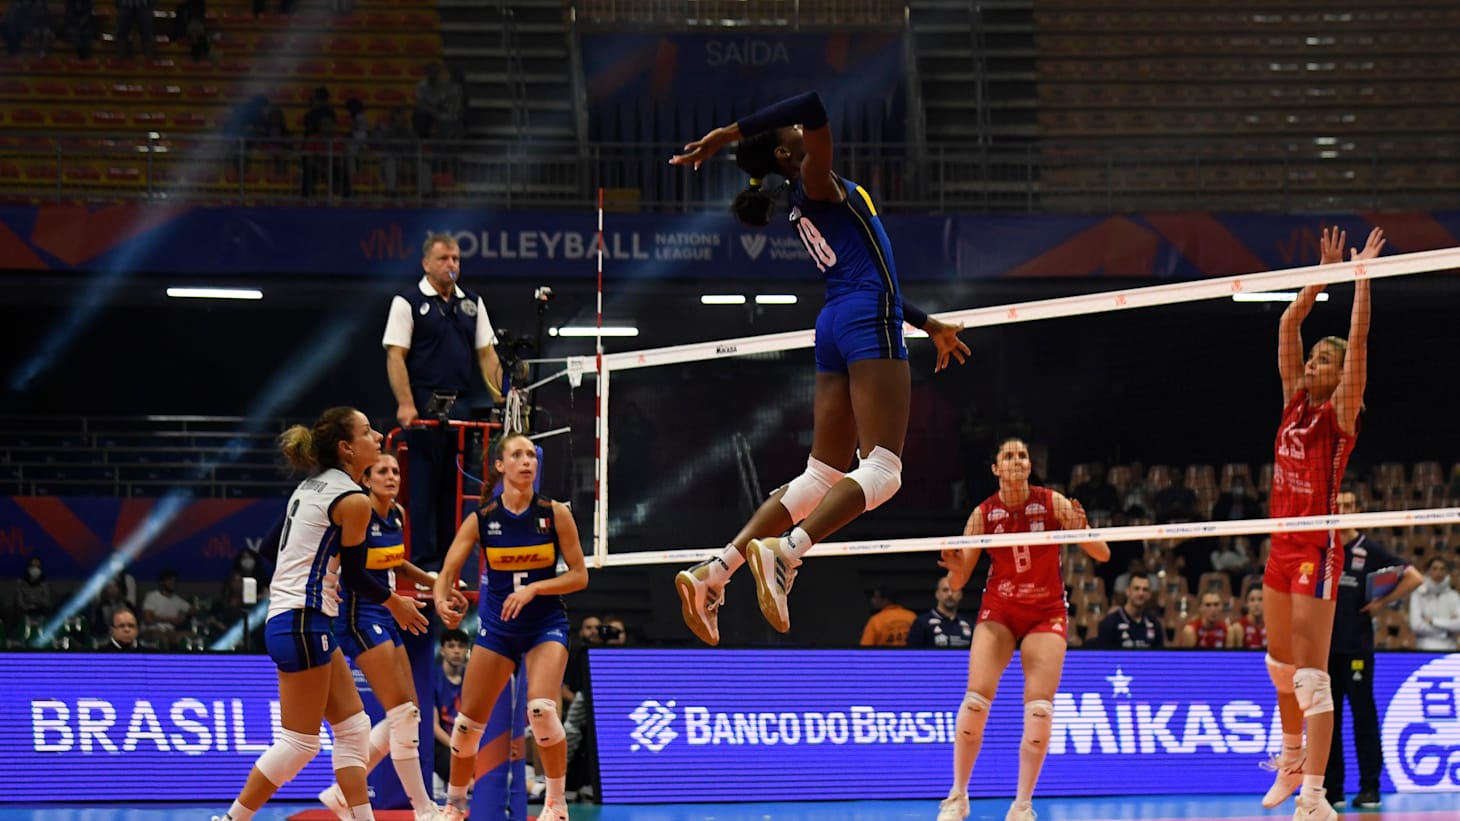 live tv volleyball nations league 2022